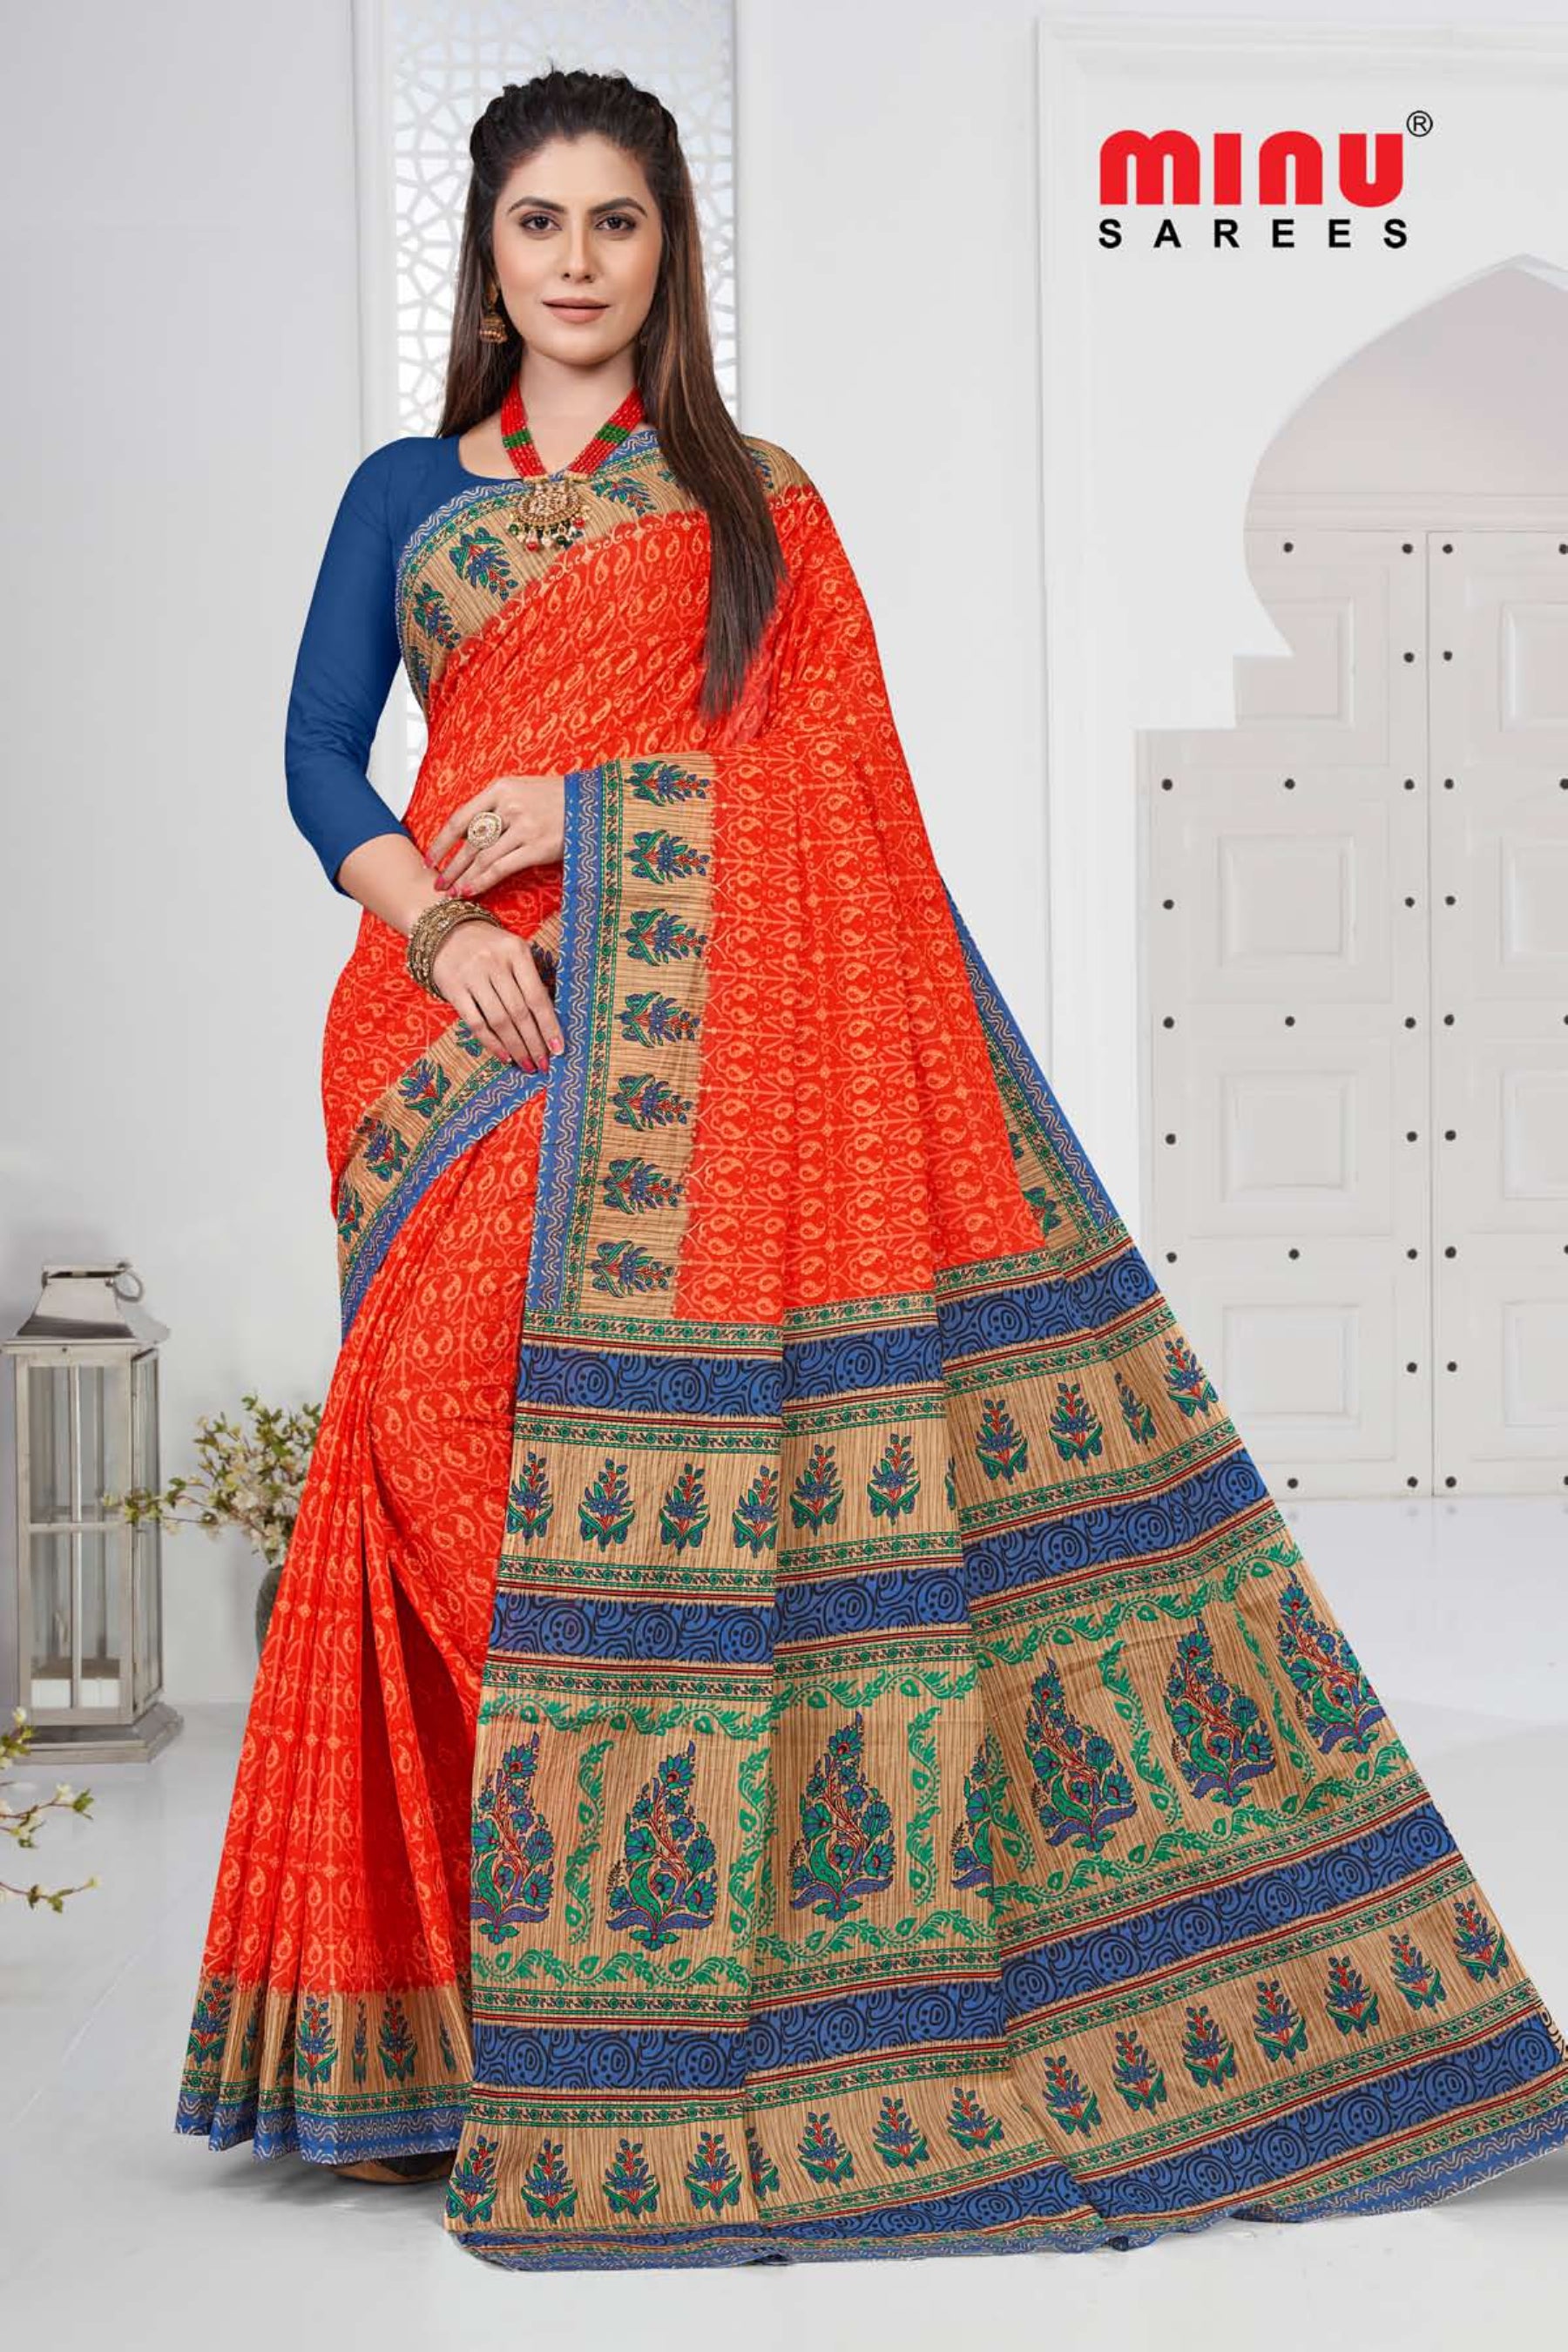 Bes quality printed sarees for women online image